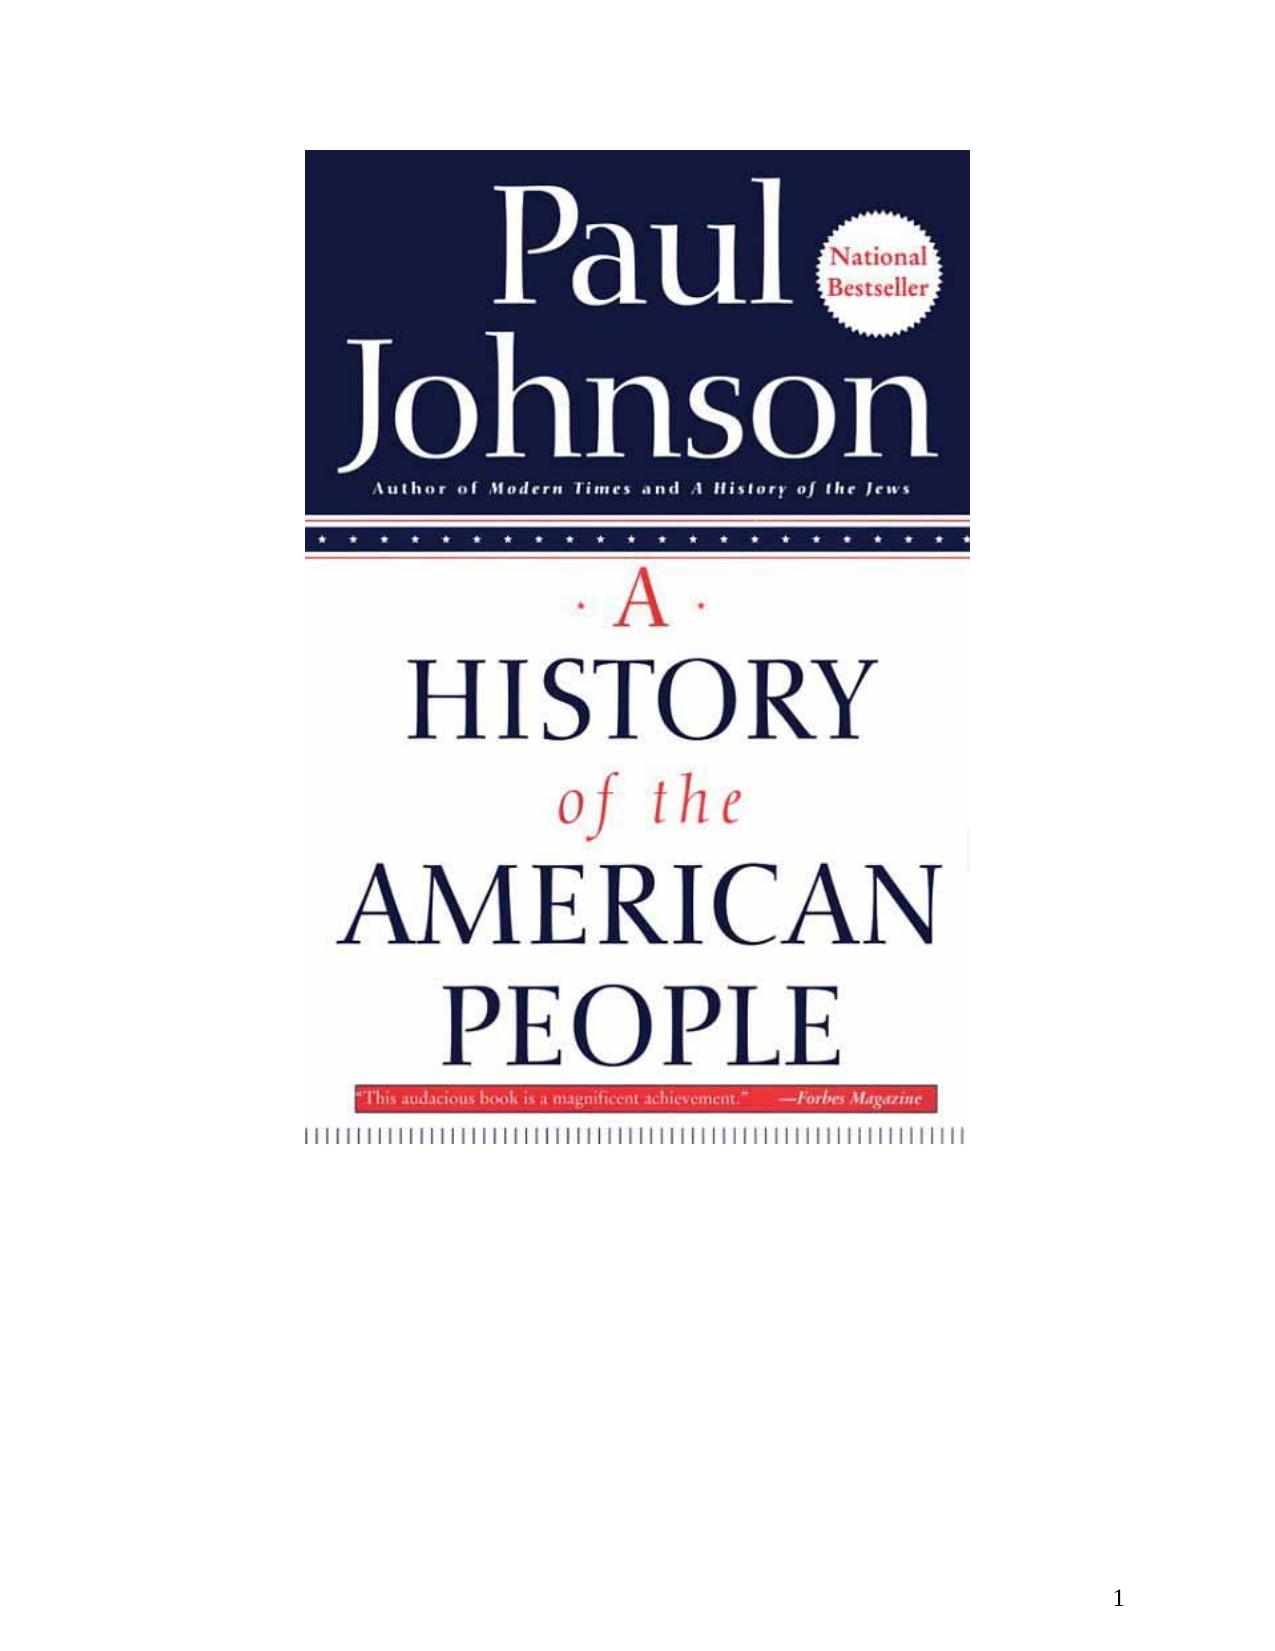 A History of the American People by Paul Johnson